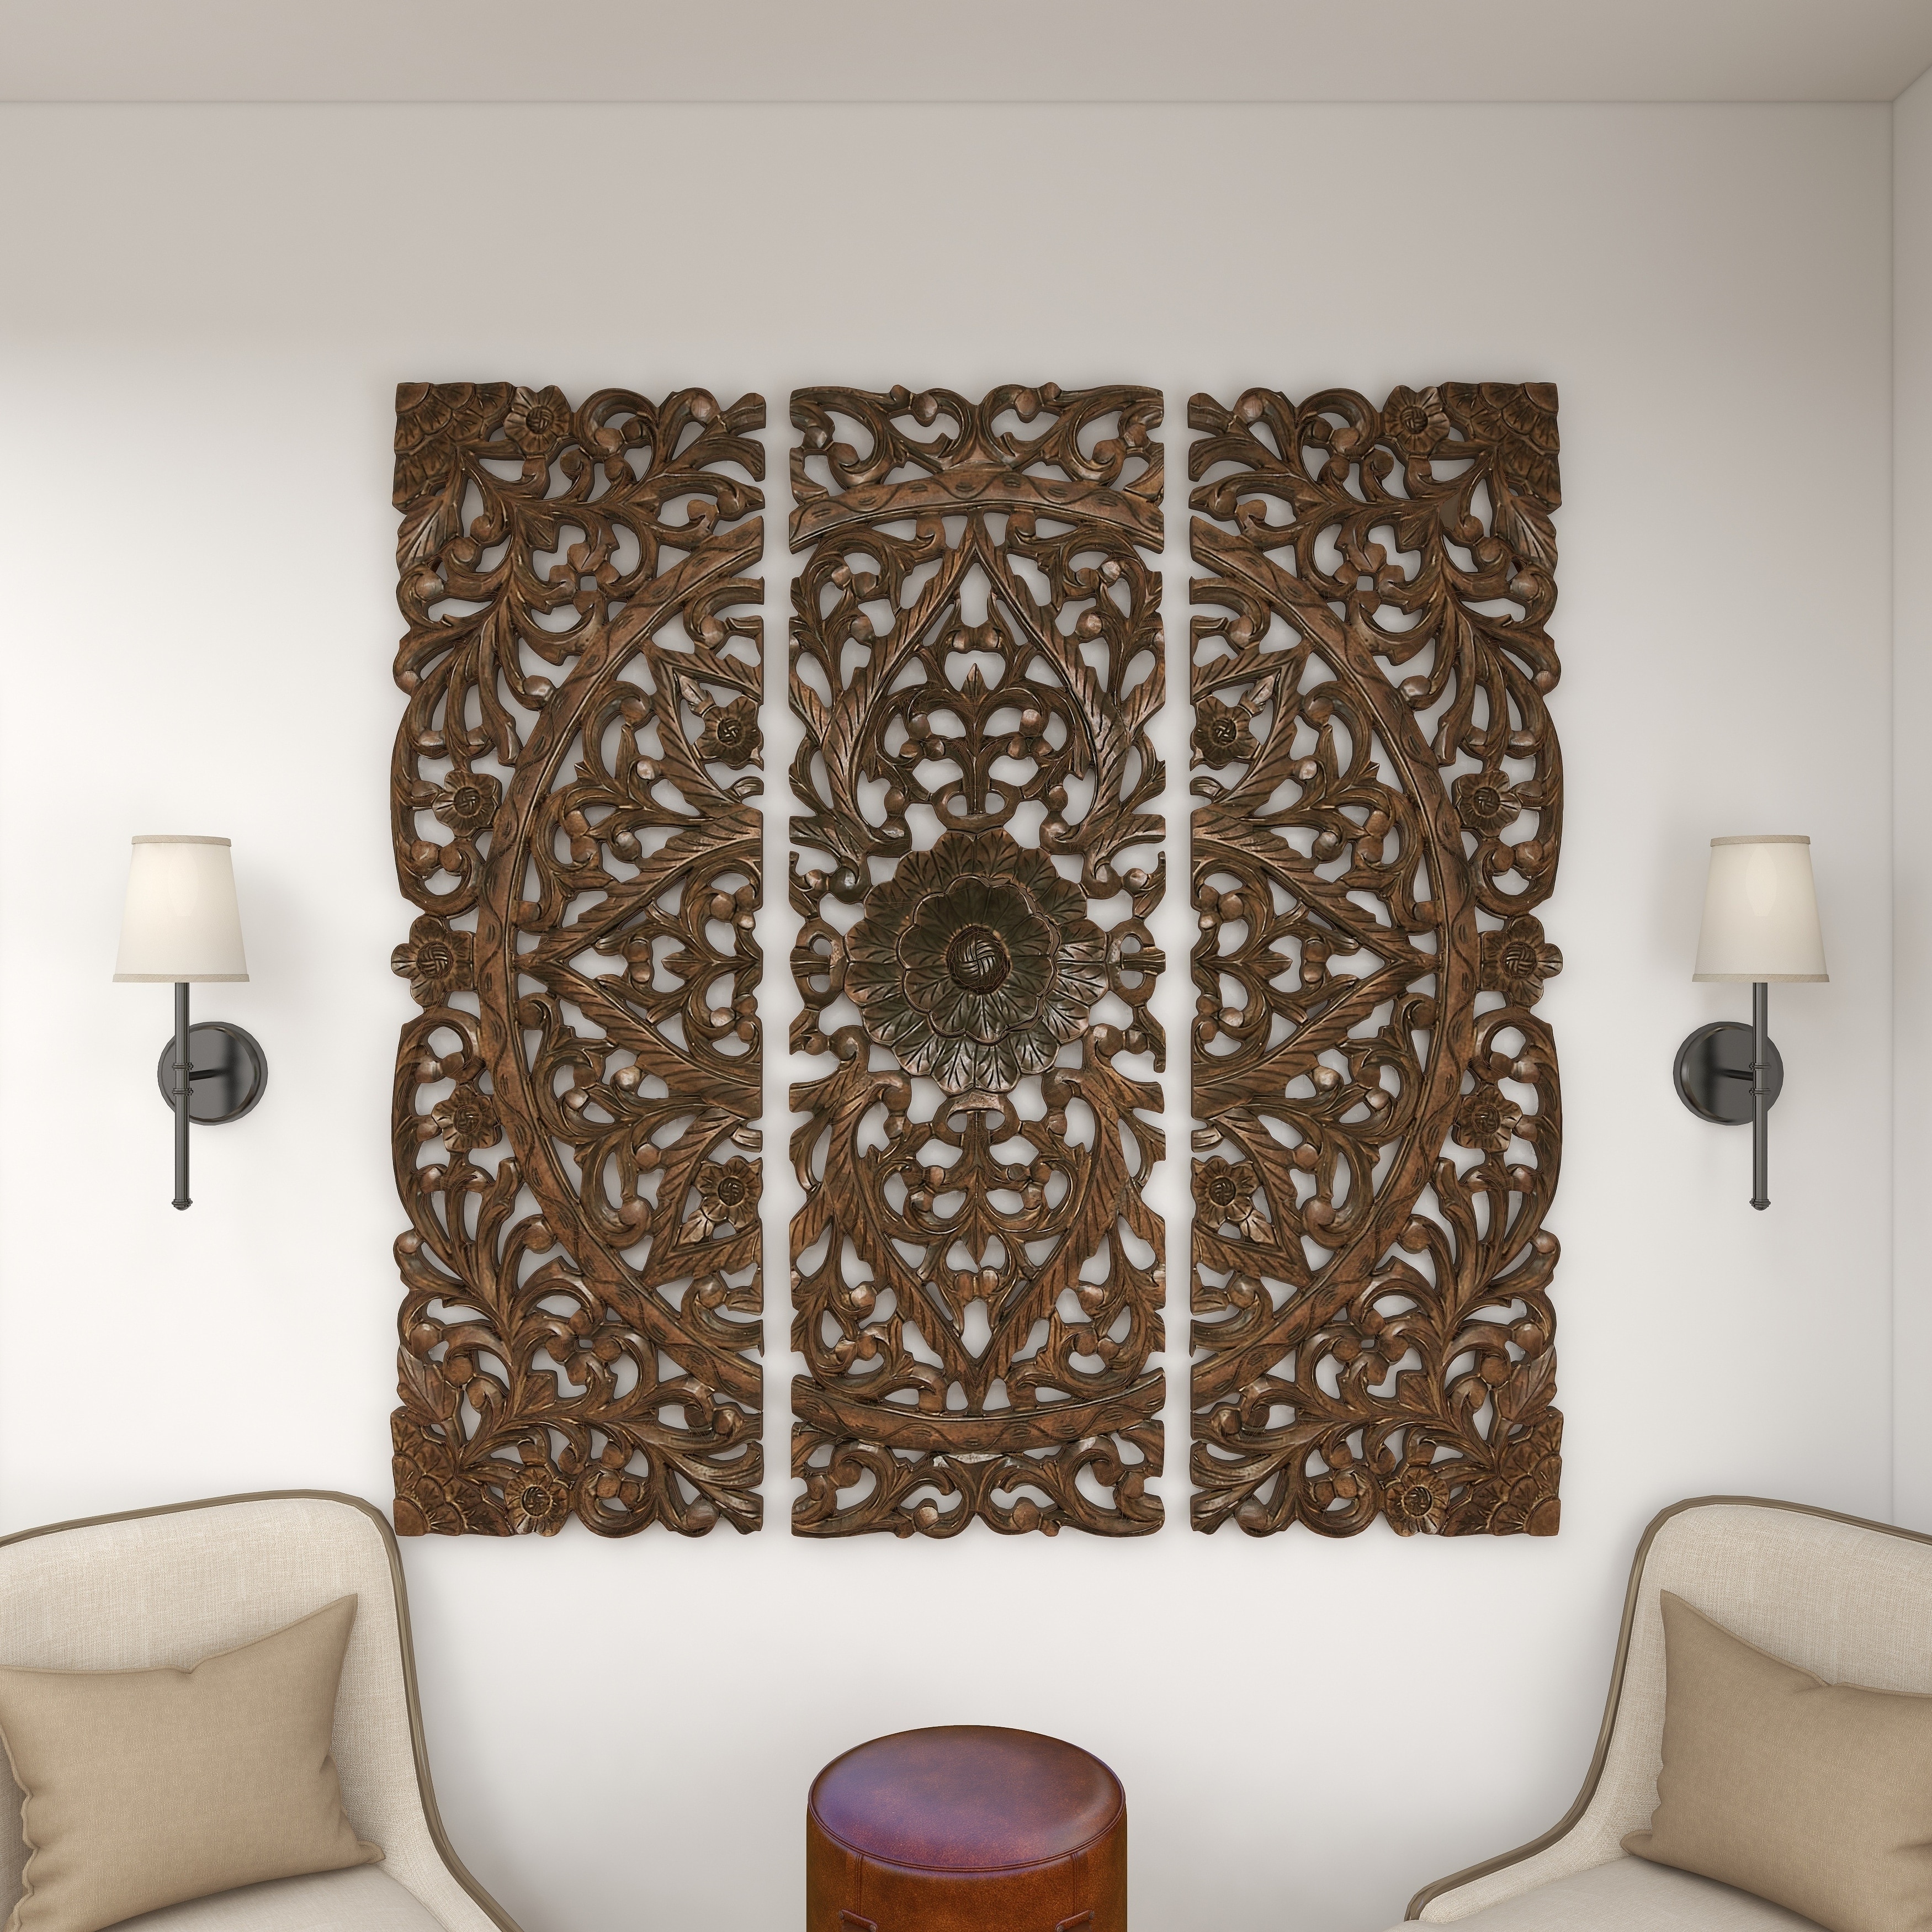 Gray or Brown Wooden Handmade Intricately Carved Floral Wall Decor with  Mandala Design (Set of 3) On Sale Bed Bath  Beyond 12179550